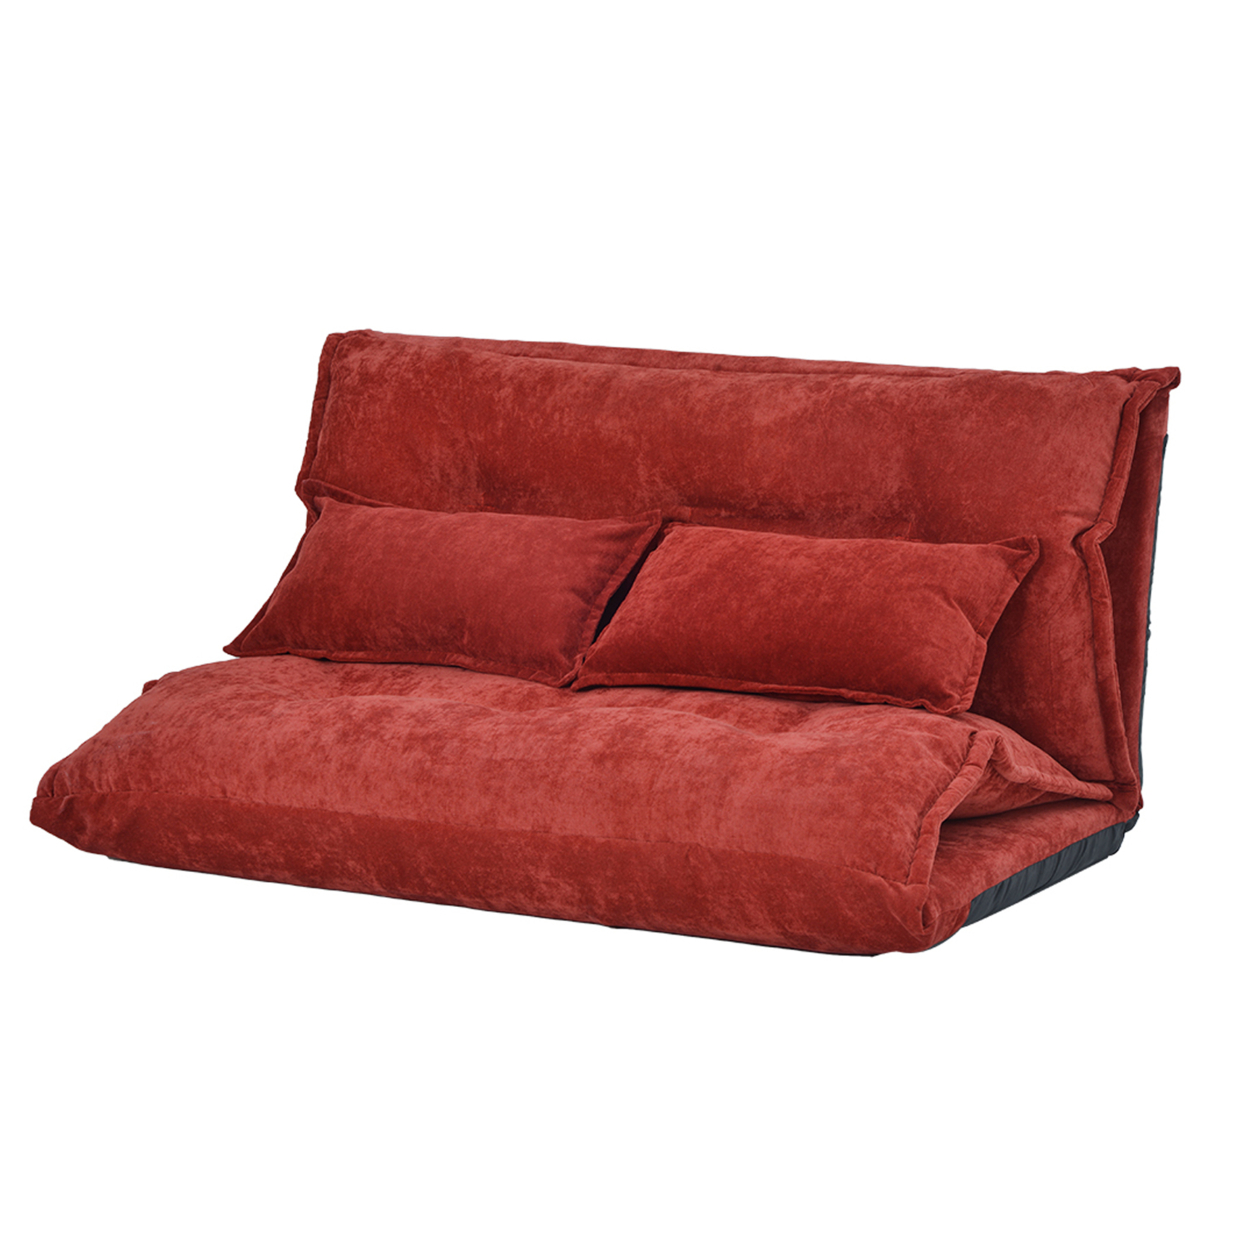 Sofa Bed With 5 Way Adjustable Back And Pillows, Red- Saltoro Sherpi